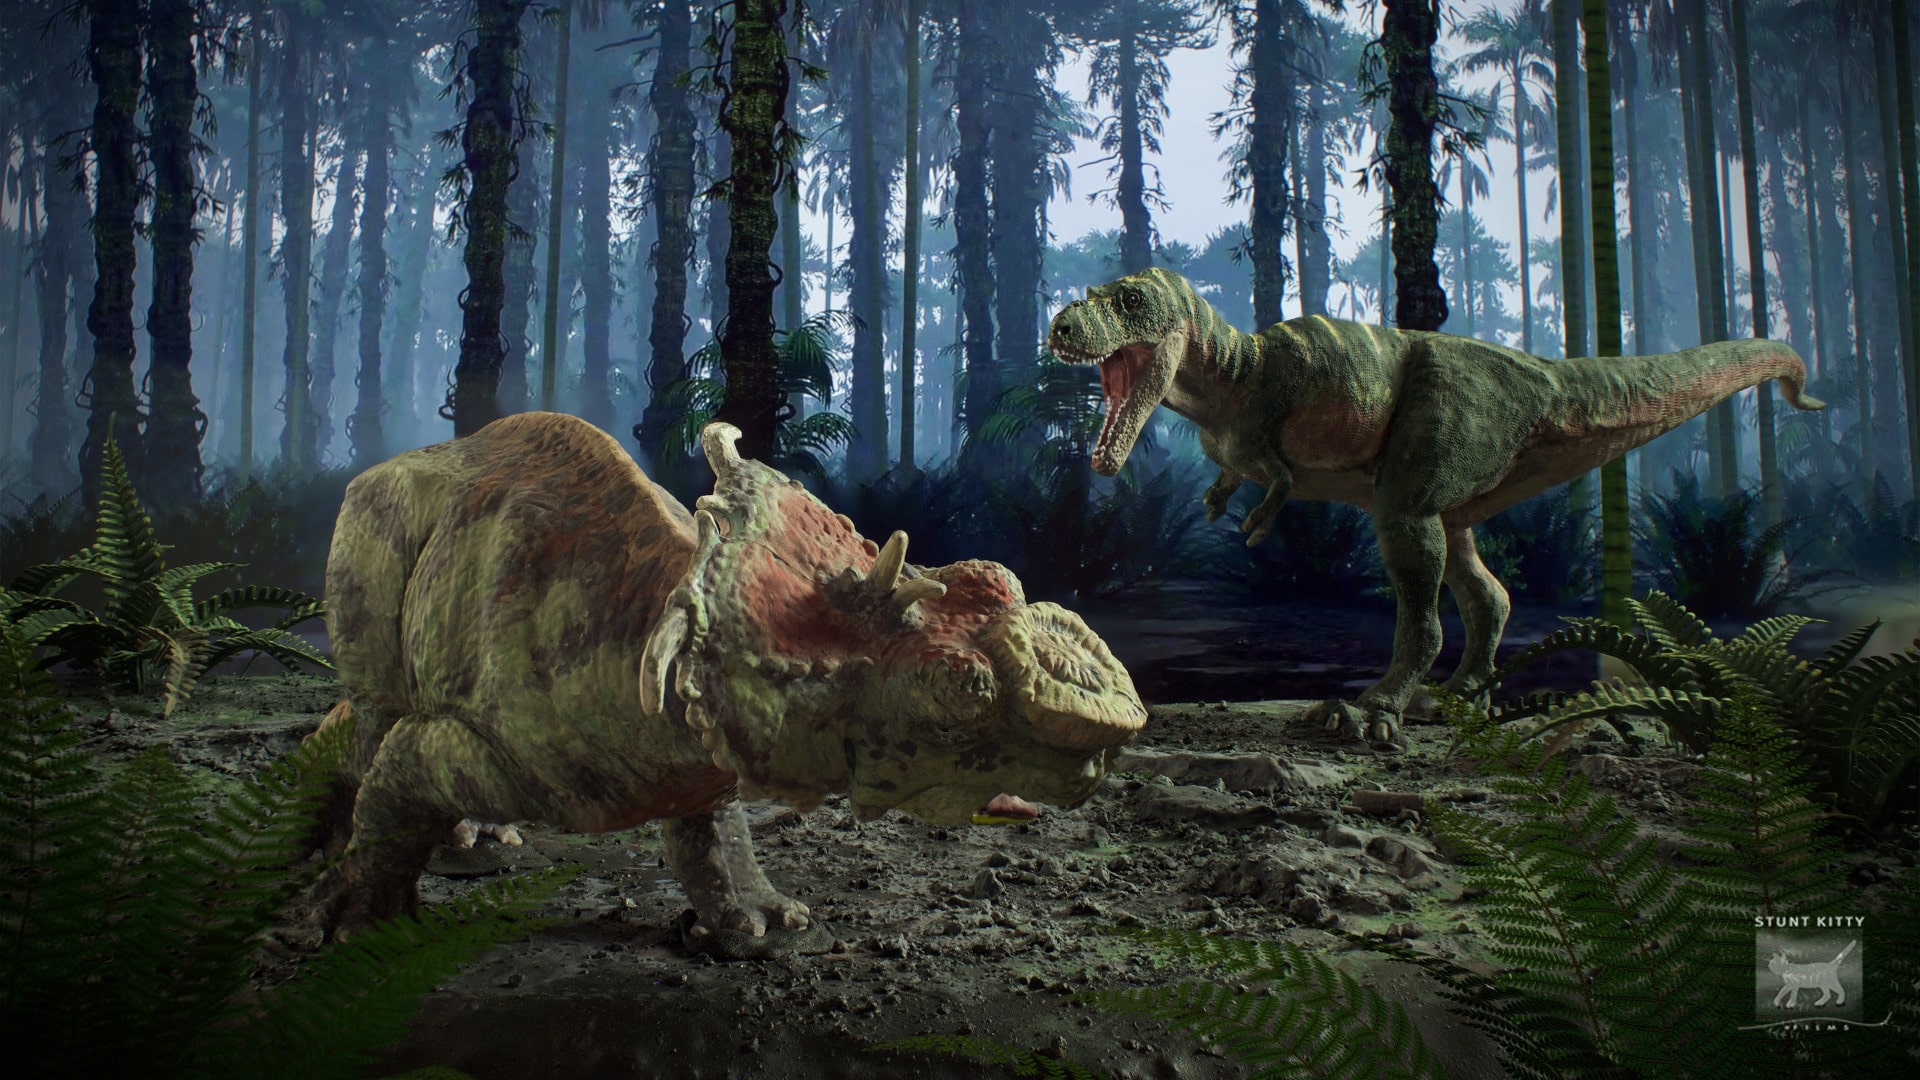 A Pachyrhinosaurus and an Albertosaurus in a Cretaceous forest